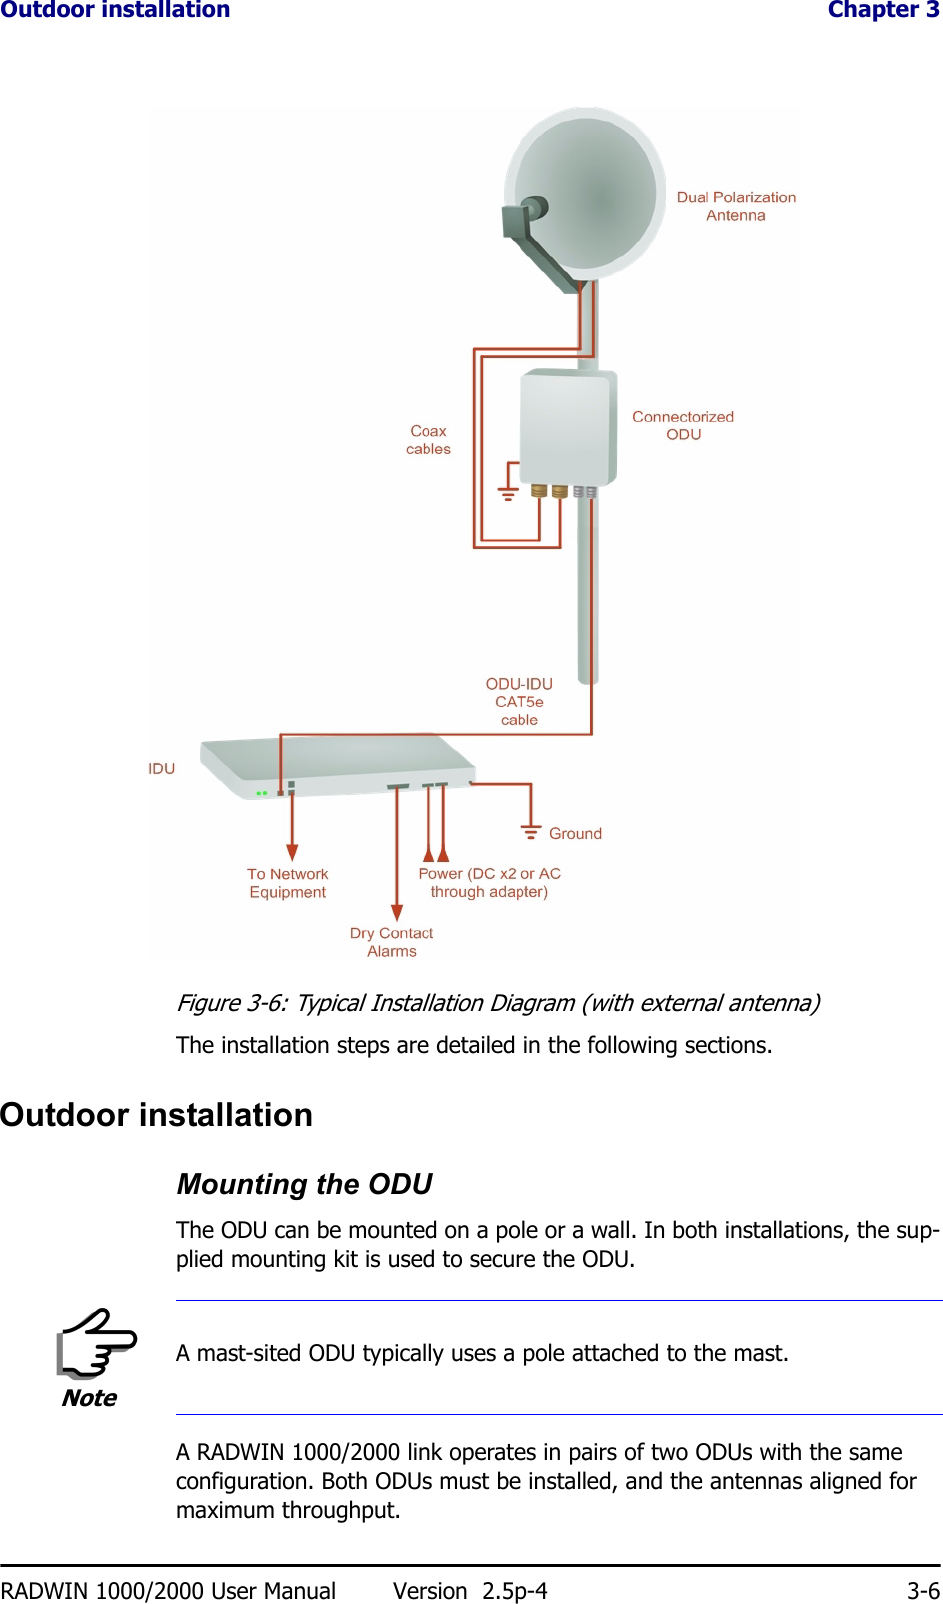 Outdoor installation  Chapter 3RADWIN 1000/2000 User Manual Version  2.5p-4 3-6Figure 3-6: Typical Installation Diagram (with external antenna)The installation steps are detailed in the following sections.Outdoor installationMounting the ODUThe ODU can be mounted on a pole or a wall. In both installations, the sup-plied mounting kit is used to secure the ODU.A RADWIN 1000/2000 link operates in pairs of two ODUs with the same configuration. Both ODUs must be installed, and the antennas aligned for maximum throughput.NoteA mast-sited ODU typically uses a pole attached to the mast.